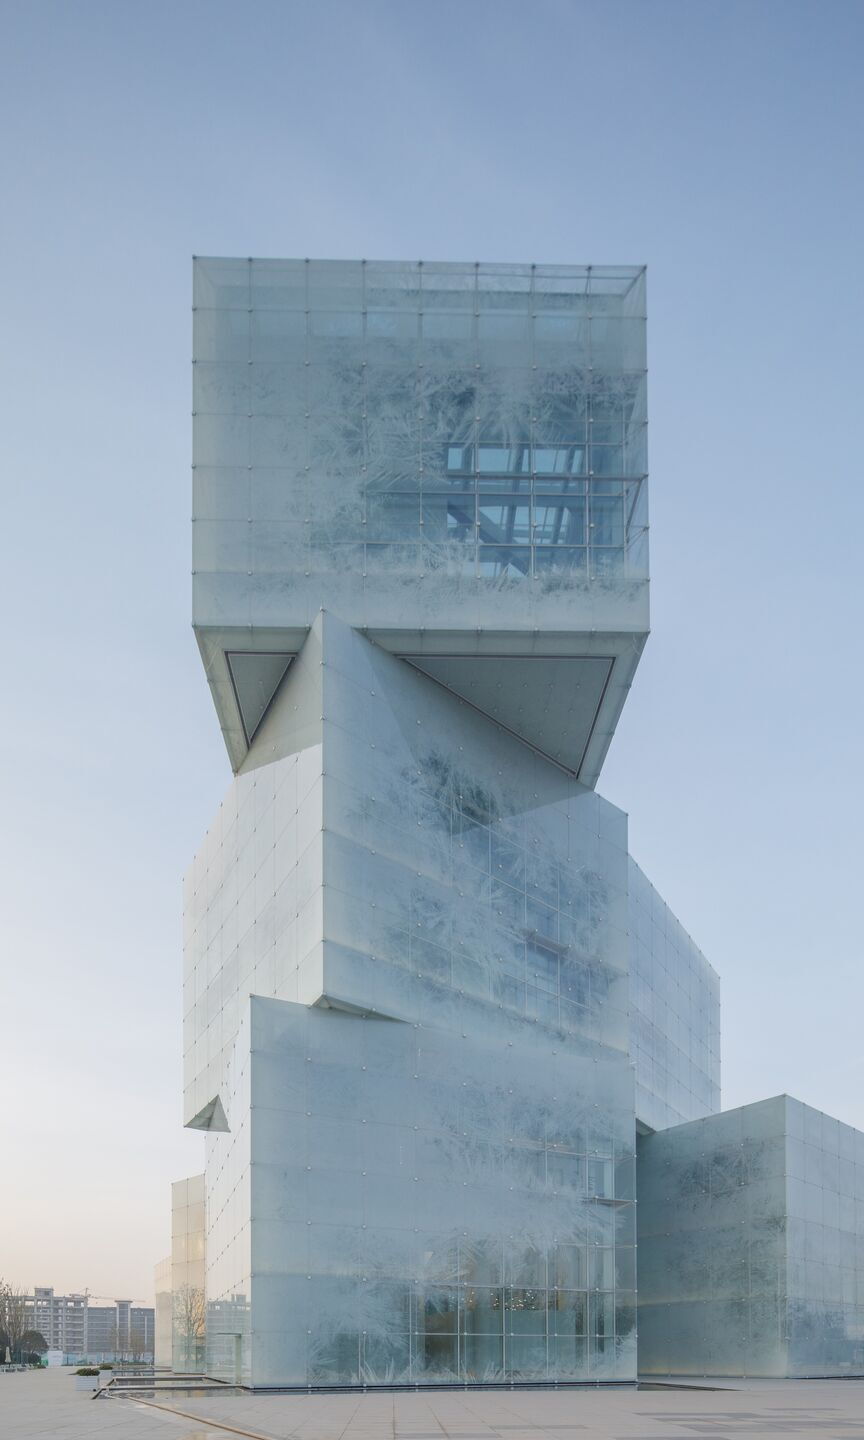 The Xinxiang Tourism Center stack takes on an entirely different shape when viewed from a different place on the ground. 